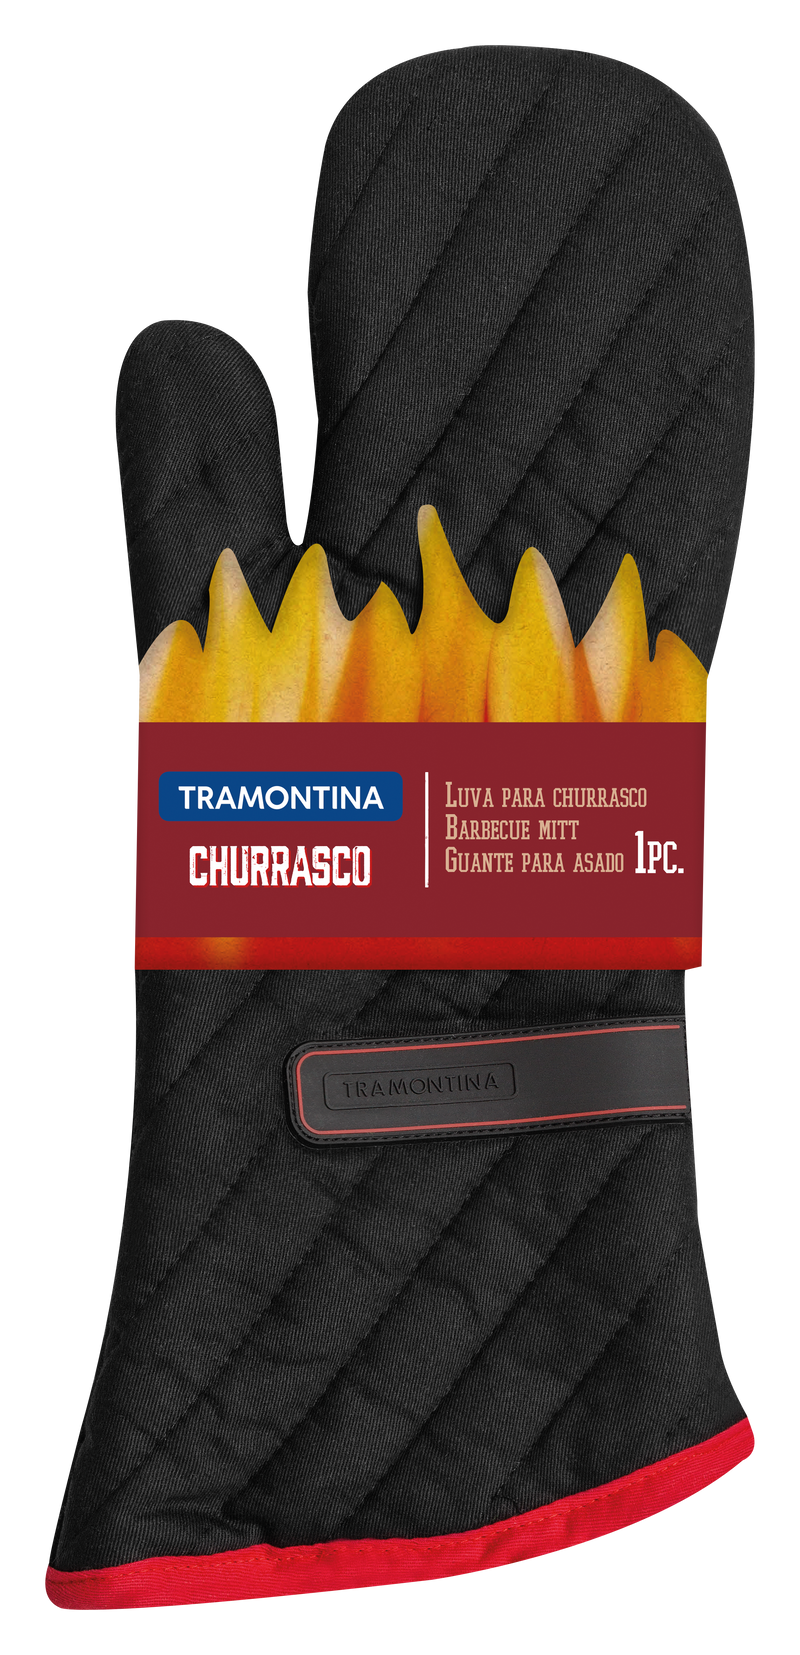 Load image into Gallery viewer, Tramontina Churrasco Barbecue Mitt
